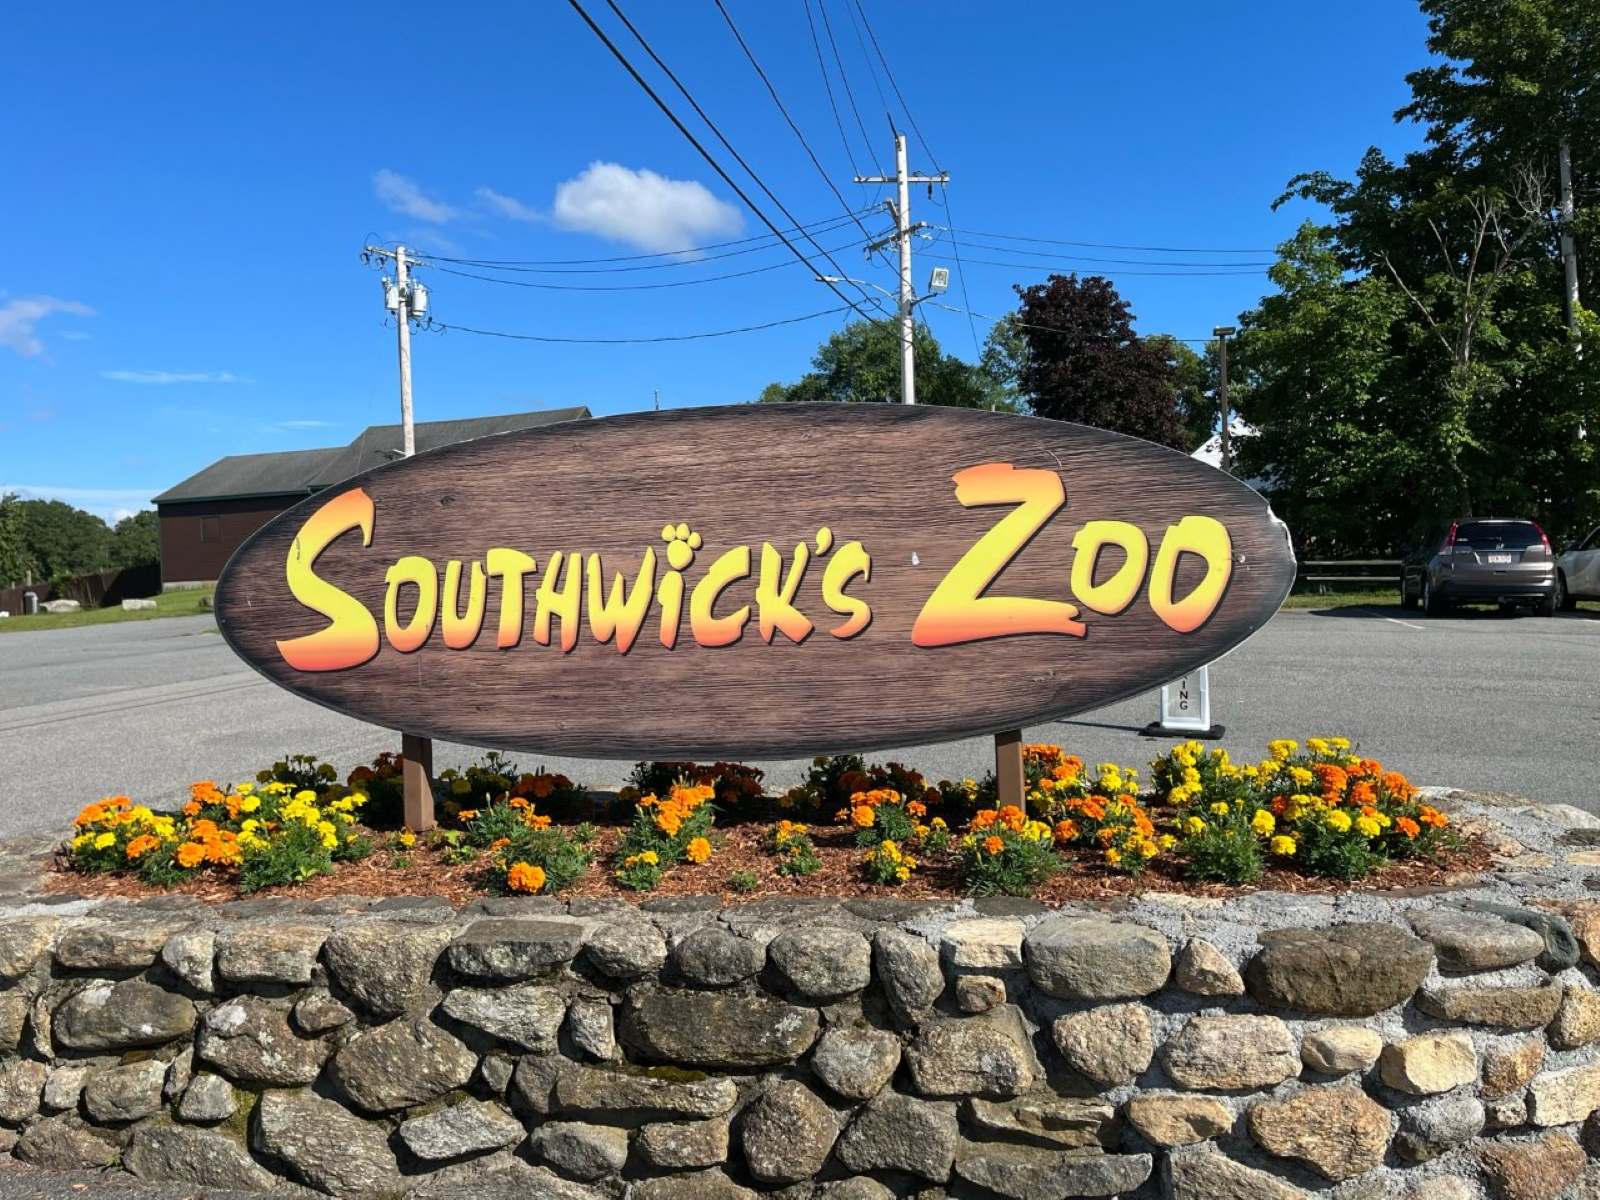 16-surprising-facts-about-southwicks-zoo